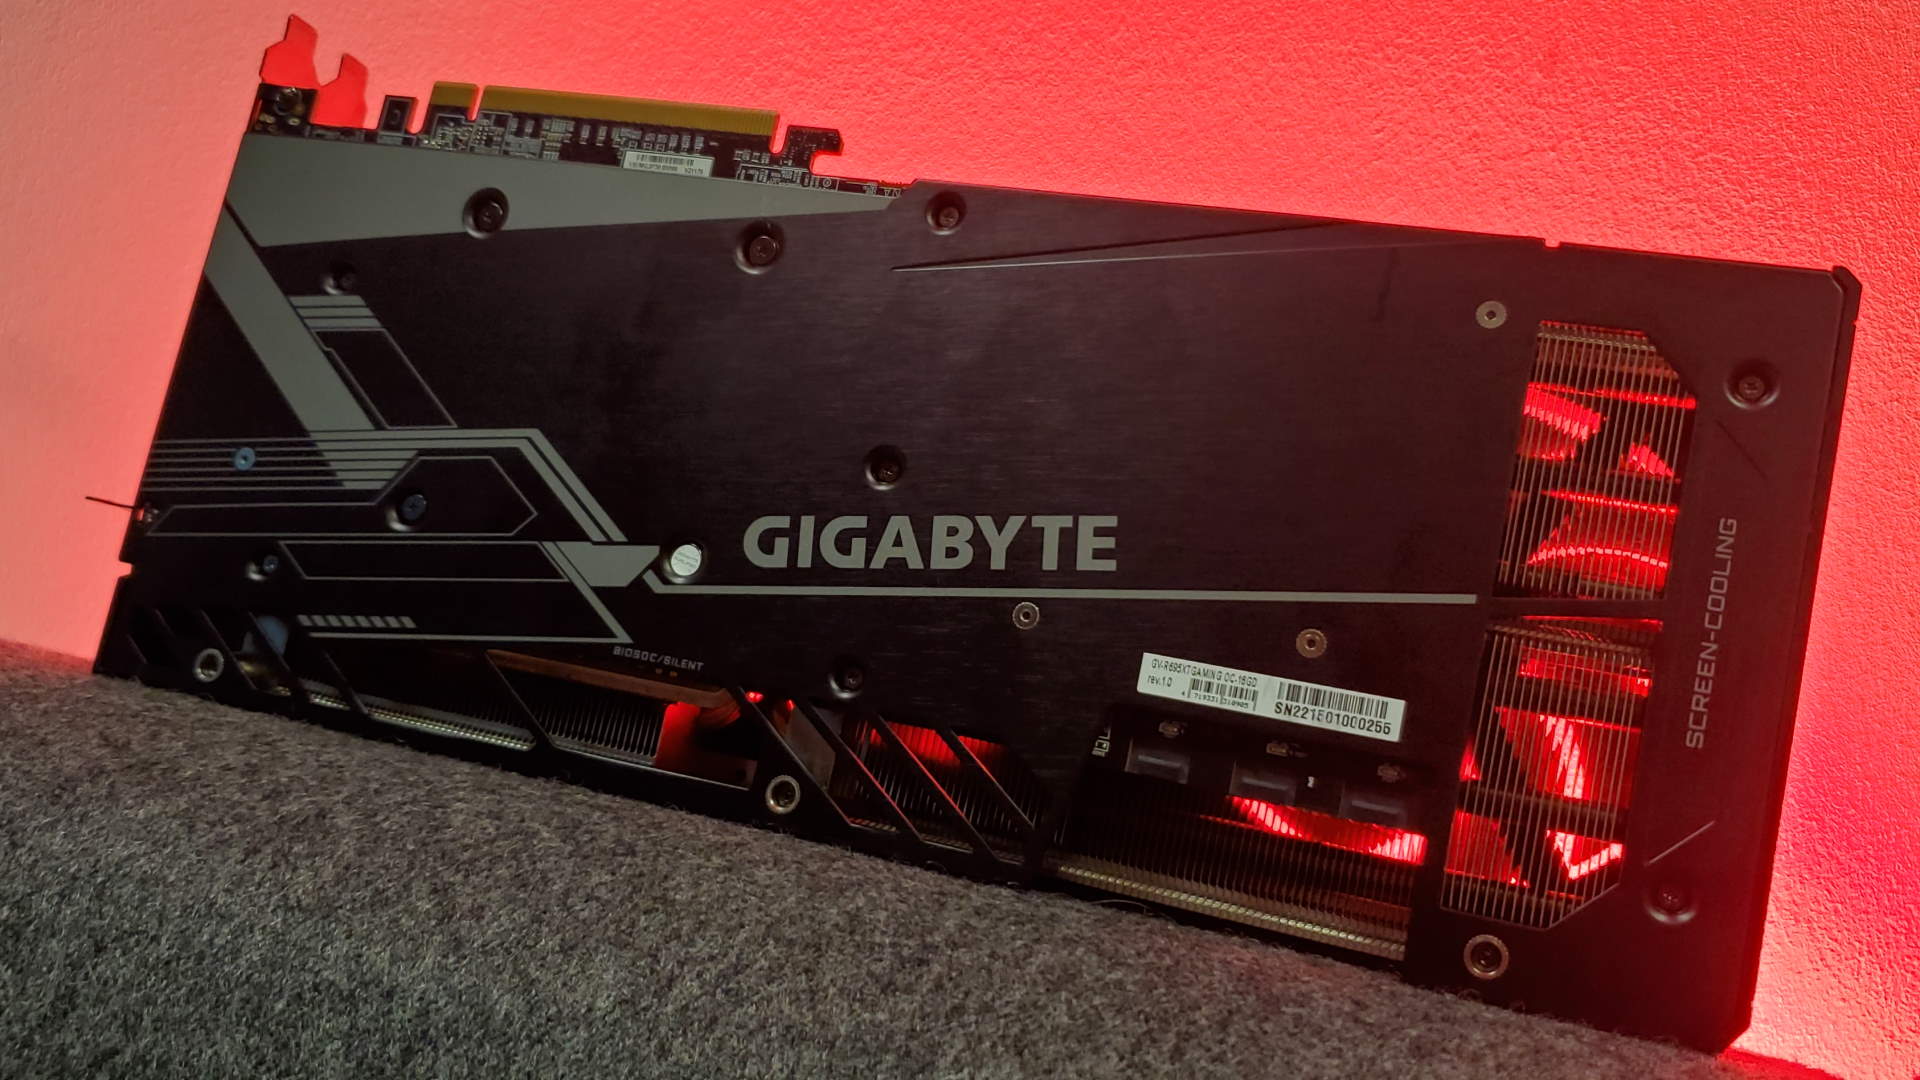 Gigabtyte RX 6950 XT Gaming OC graphics card